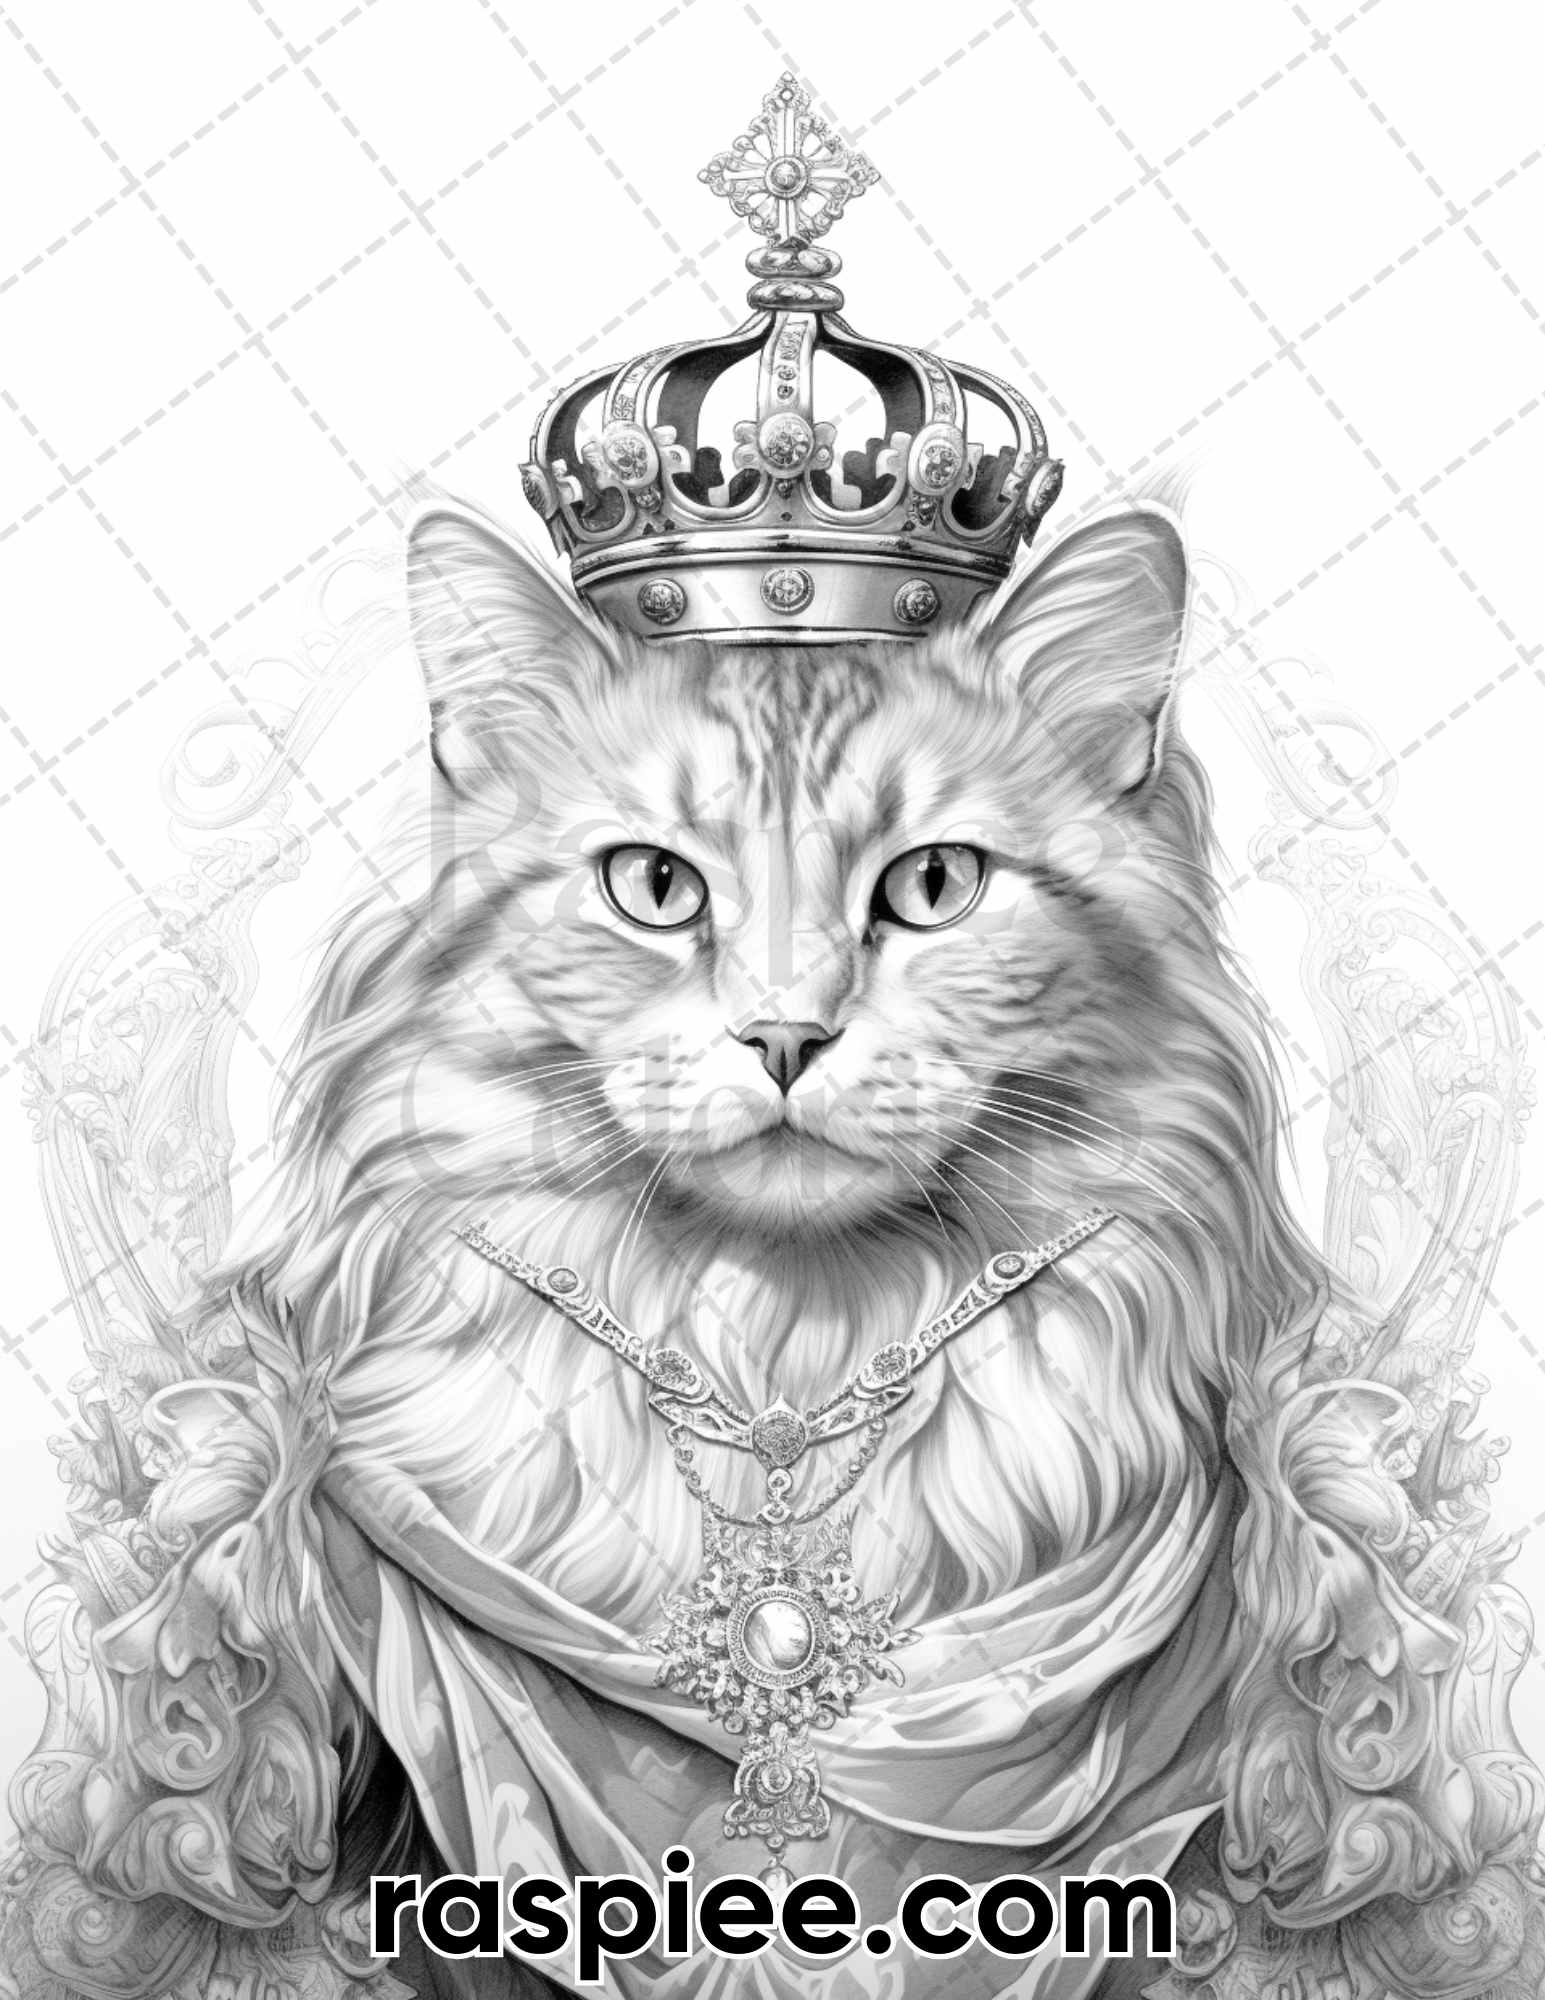 Royal King Cat Coloring Pages, Grayscale Adult Coloring Pages, Cat Lovers Coloring Pages, Animal Coloring Pages for Adults, Animal Coloring Book Printable, Animal Coloring Sheets, Cat Coloring Sheets, Cat Coloring Pages for Adults